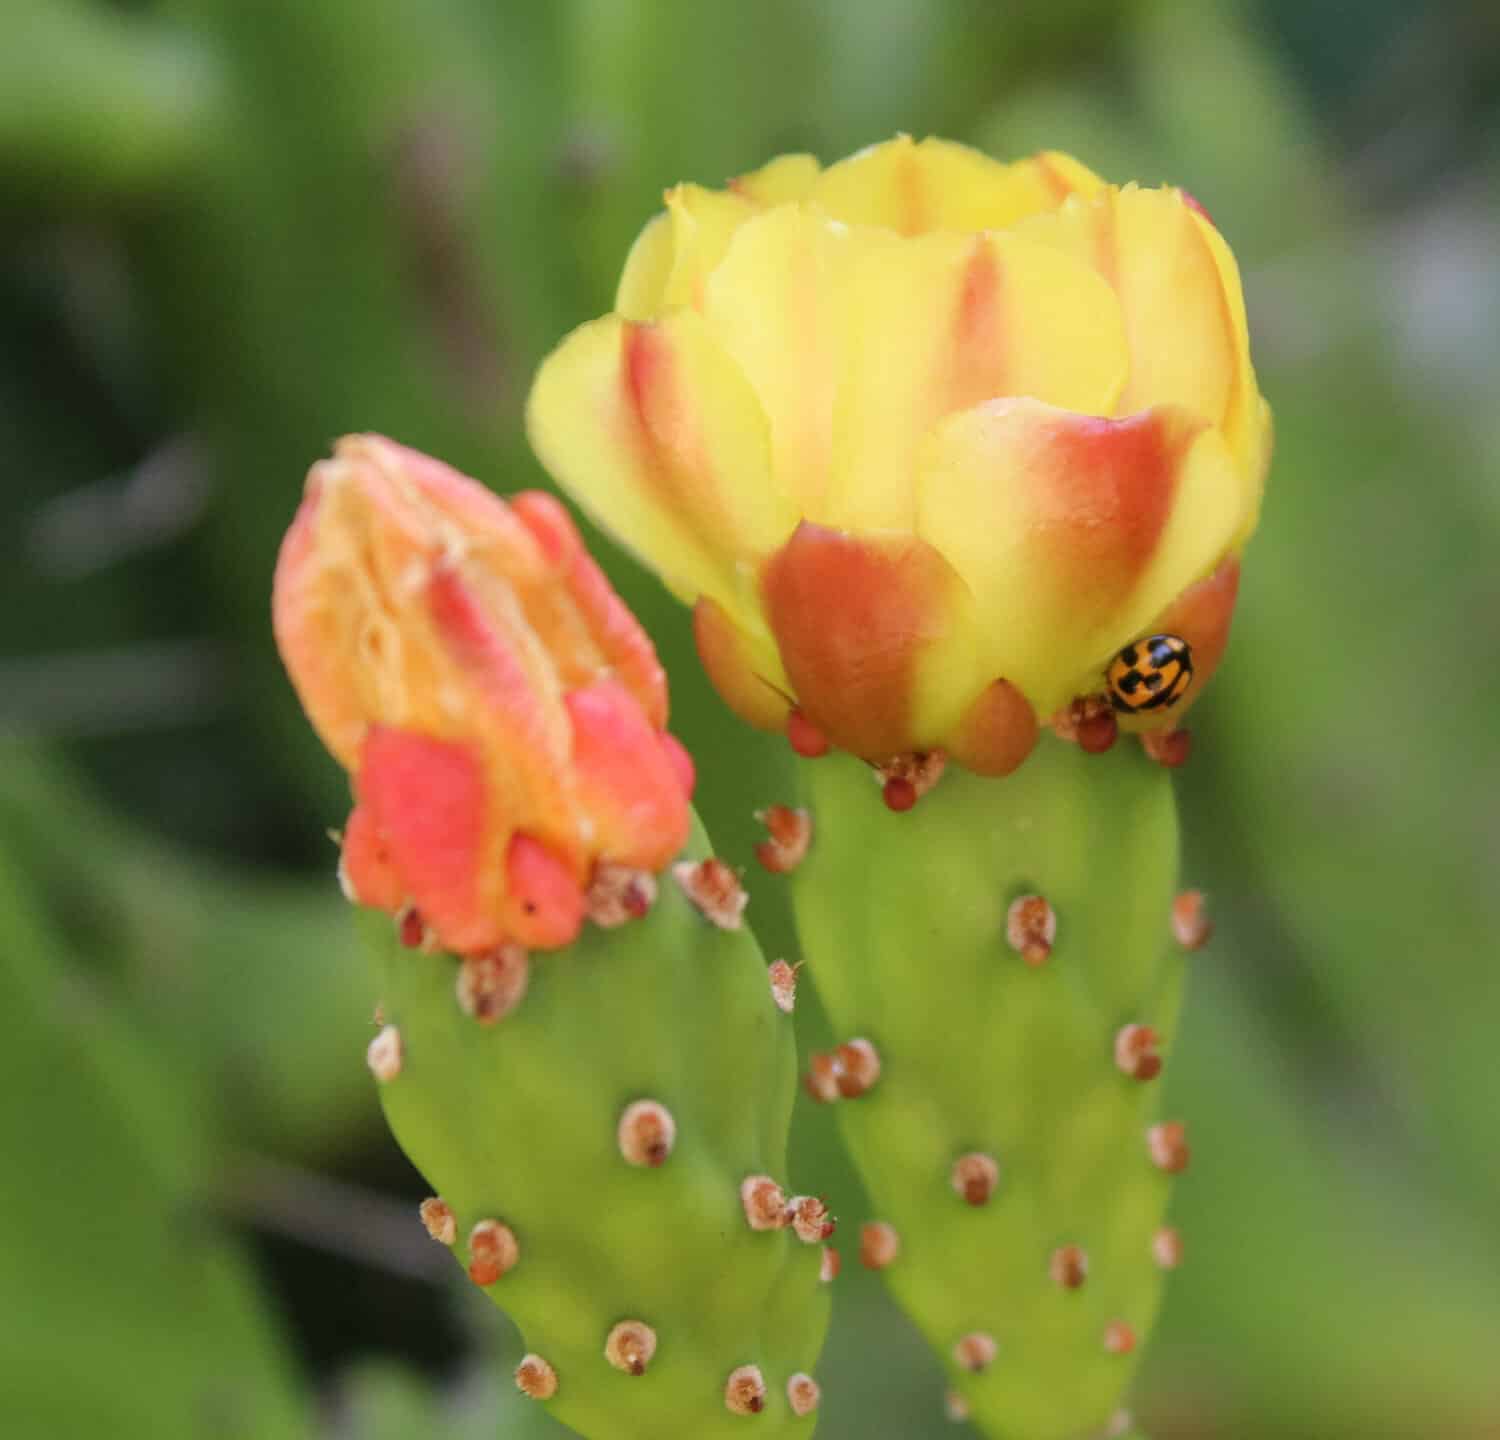 A photograph of a Common Spotted Ladybird (Harmonia conformis) on a blossoming Common Prickly Pear Cactus (Opuntia robusta) in Brisbane, Australia.